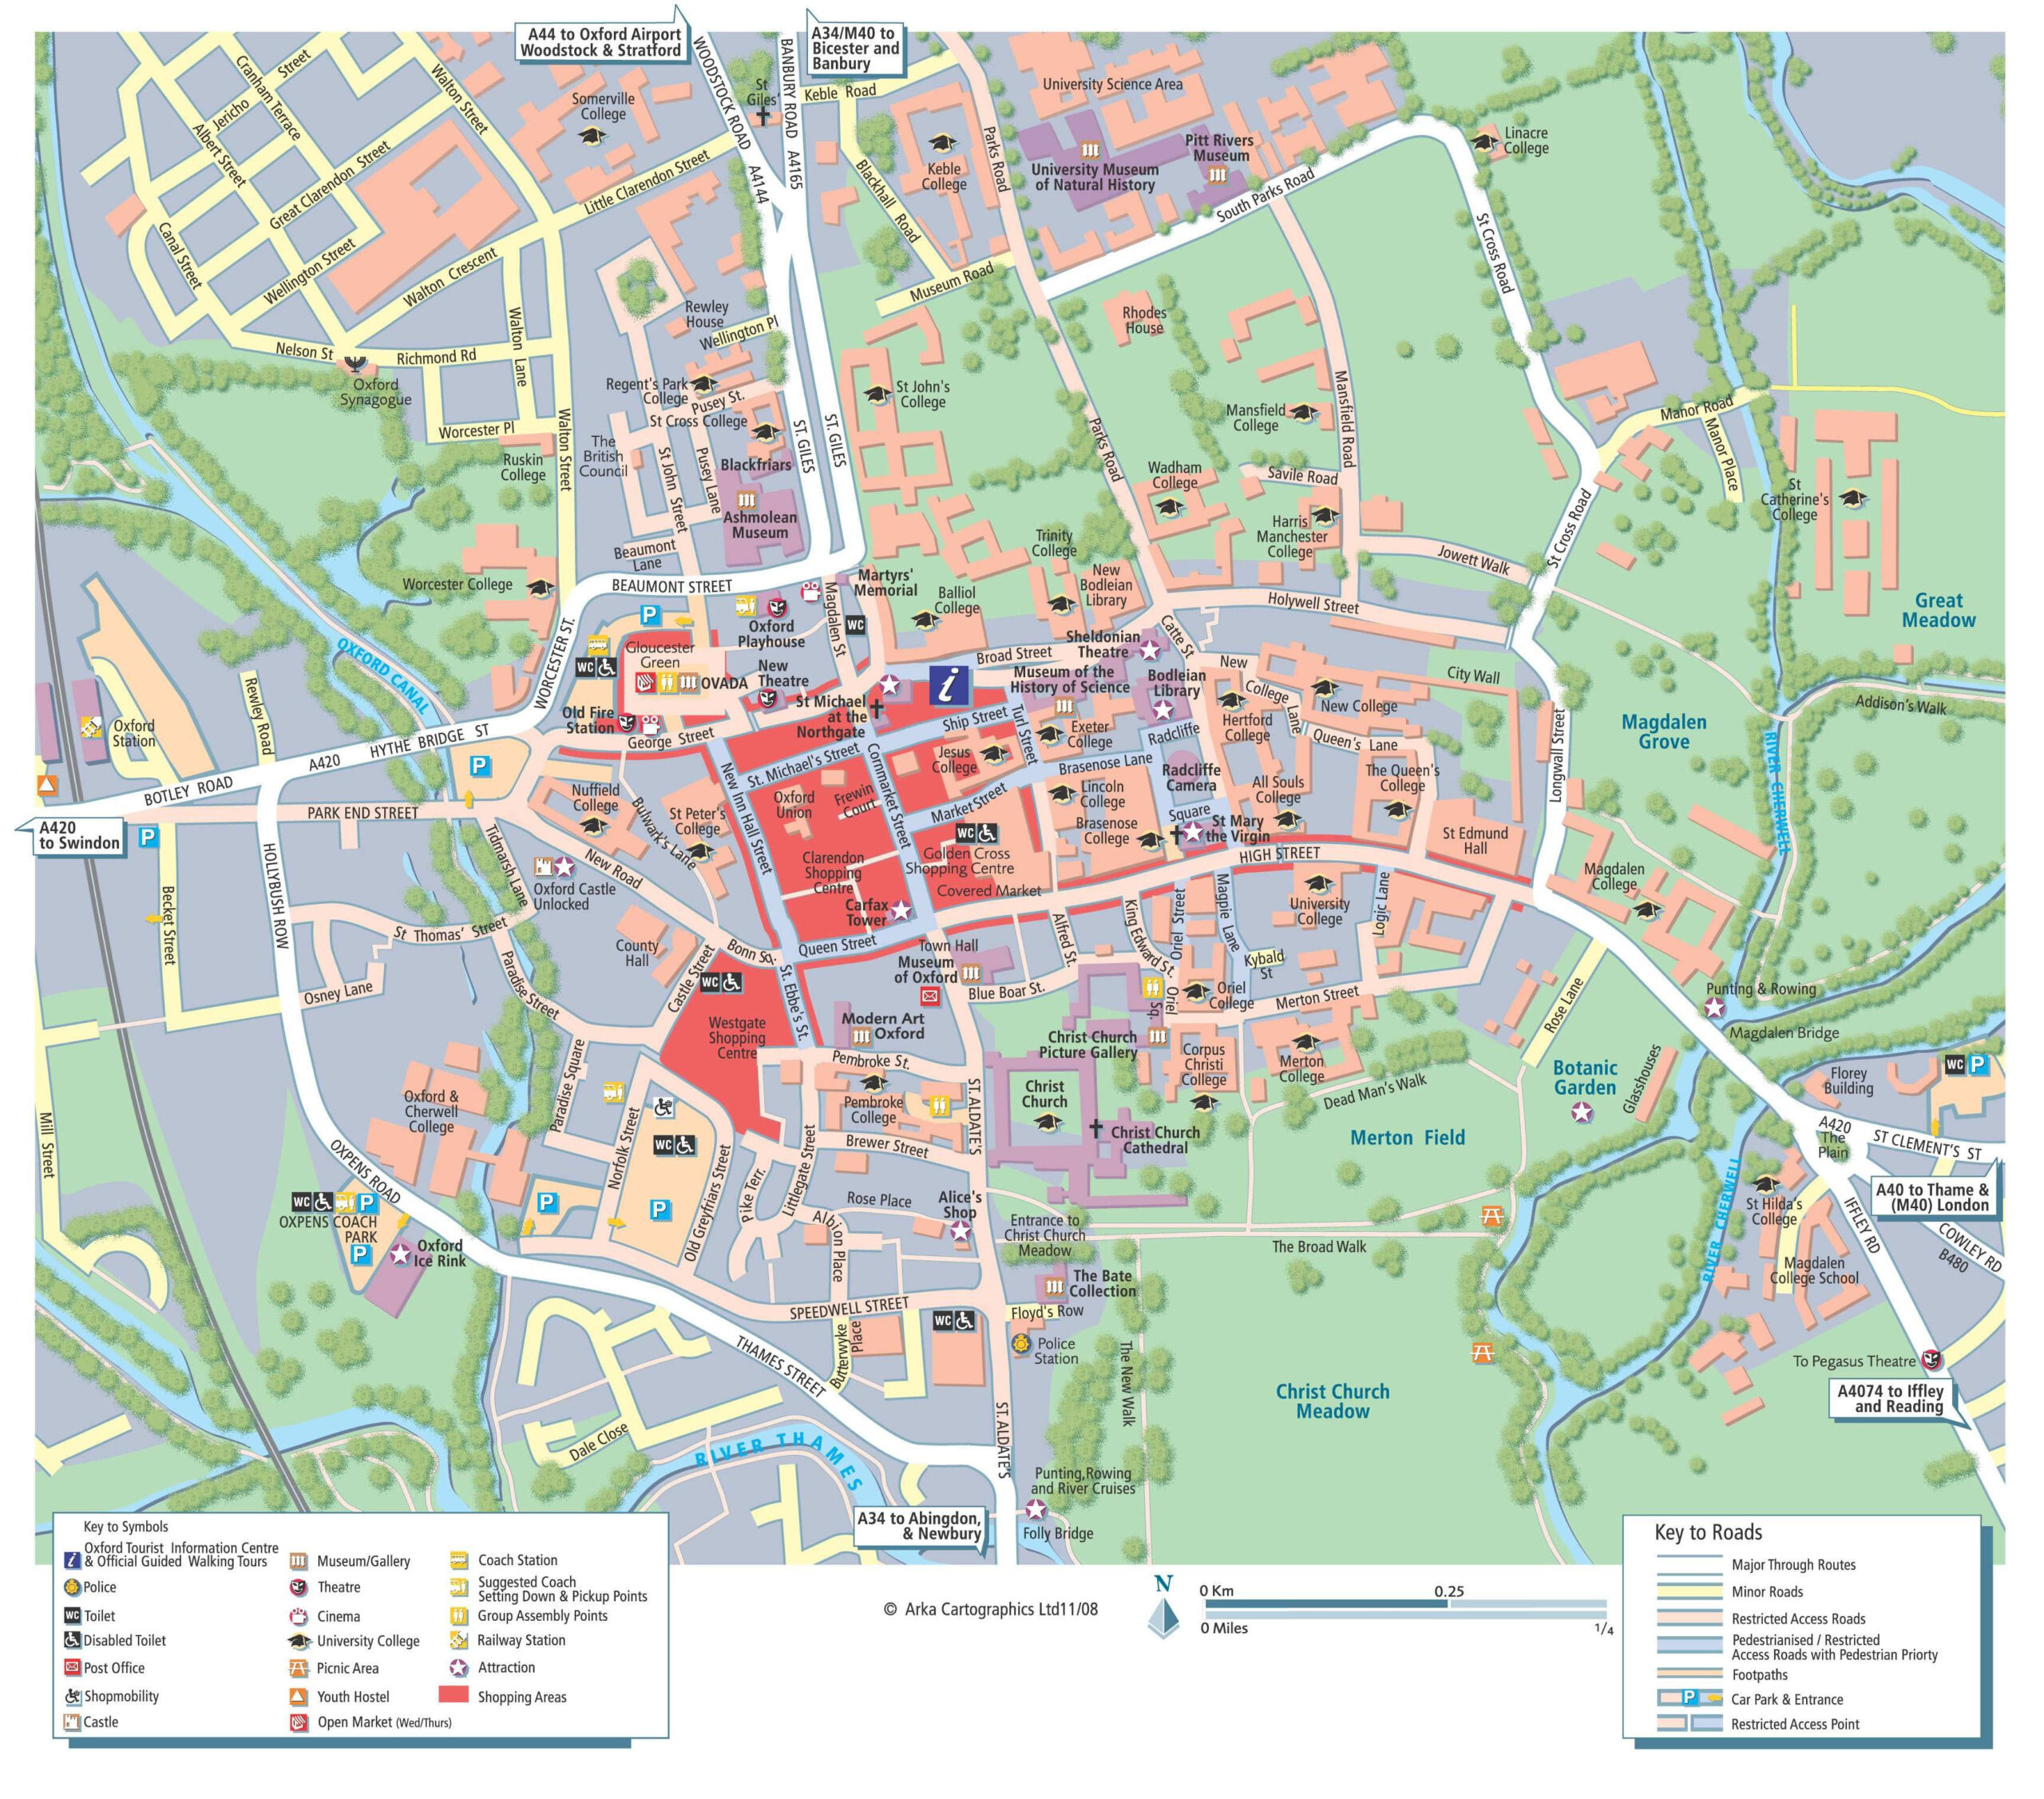 Detailed Map Of Oxford For Print Or Download In 2021 Oxford Map 